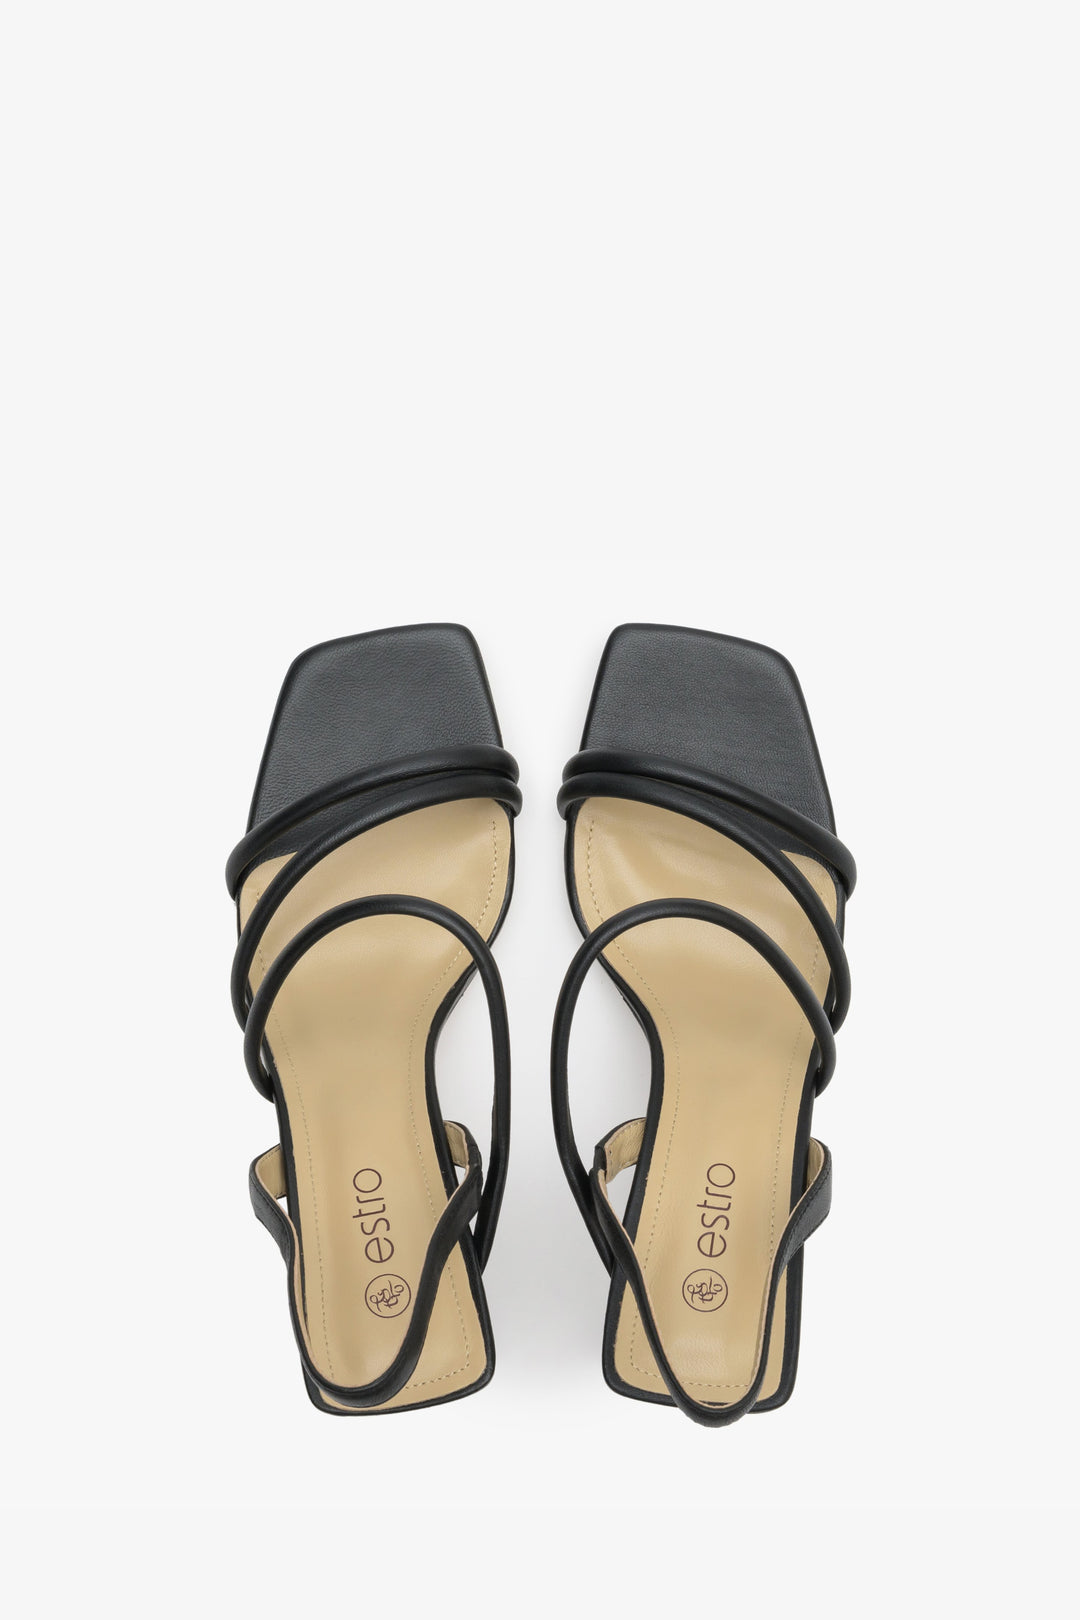 Women's black strappy sandals made of natural leather, Estro brand - presentation of the footwear from above.